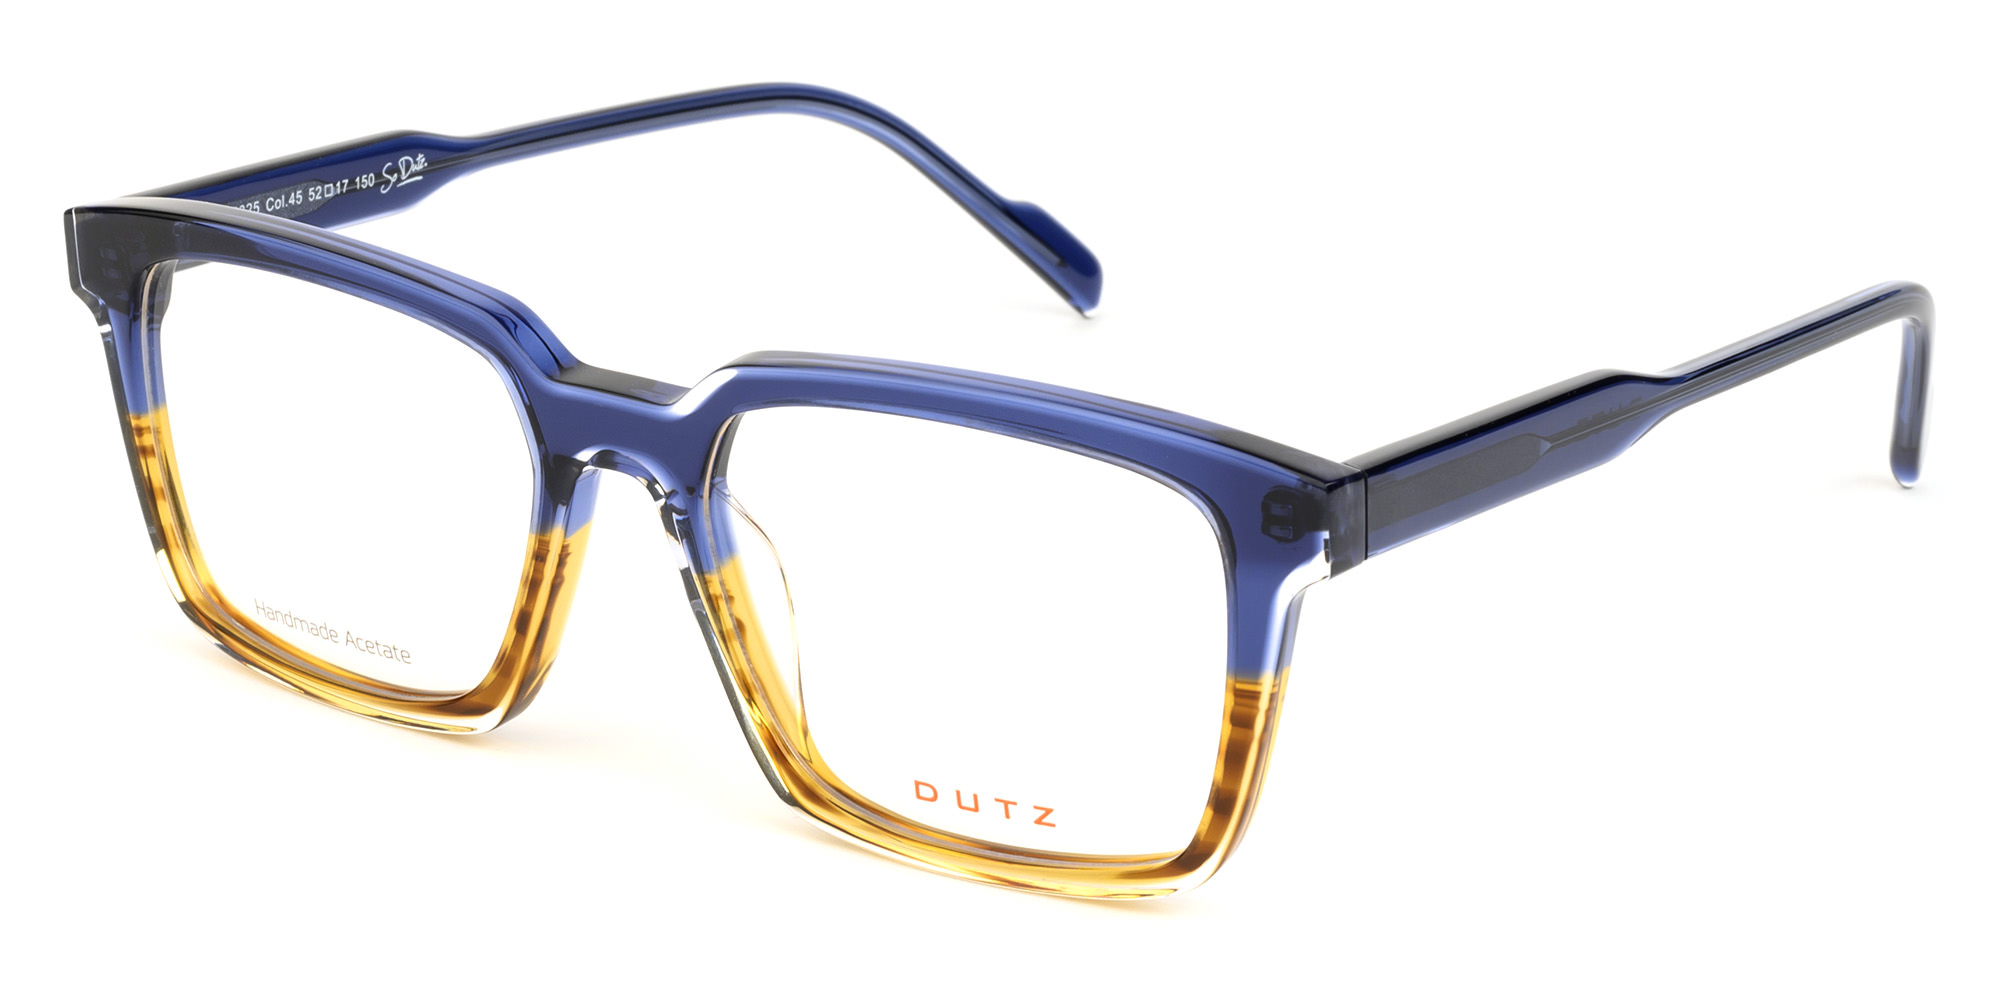 Bi-color, blue combined with crystal havana pattern, acetate frame and matching color temples